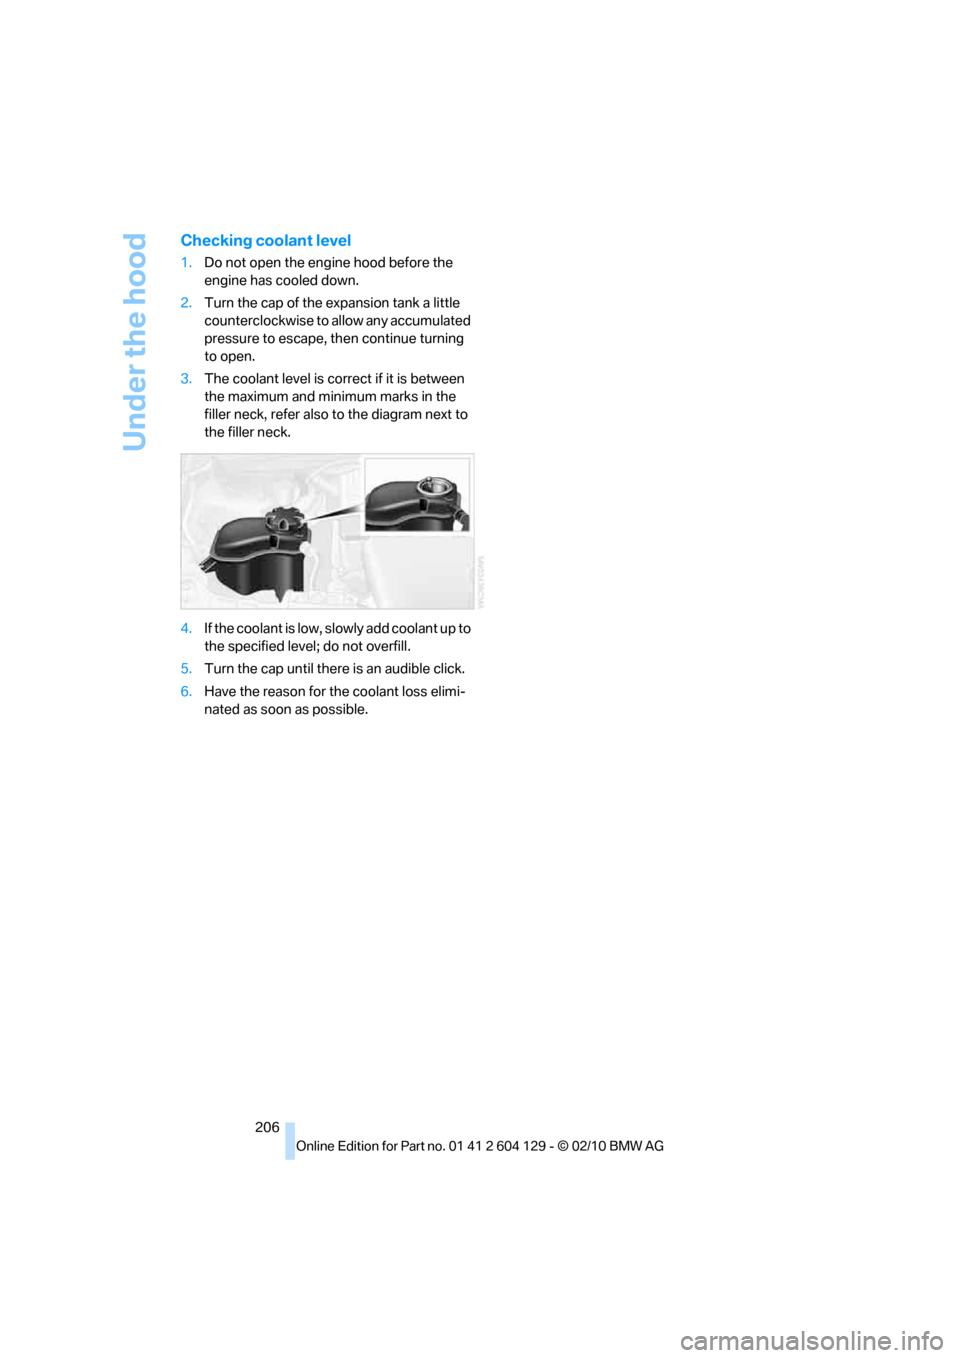 BMW 135I CONVERTIBLE 2011 E88 Owners Manual Under the hood
206
Checking coolant level
1.Do not open the engine hood before the 
engine has cooled down.
2.Turn the cap of the expansion tank a little 
counterclockwise to allow any accumulated 
pr